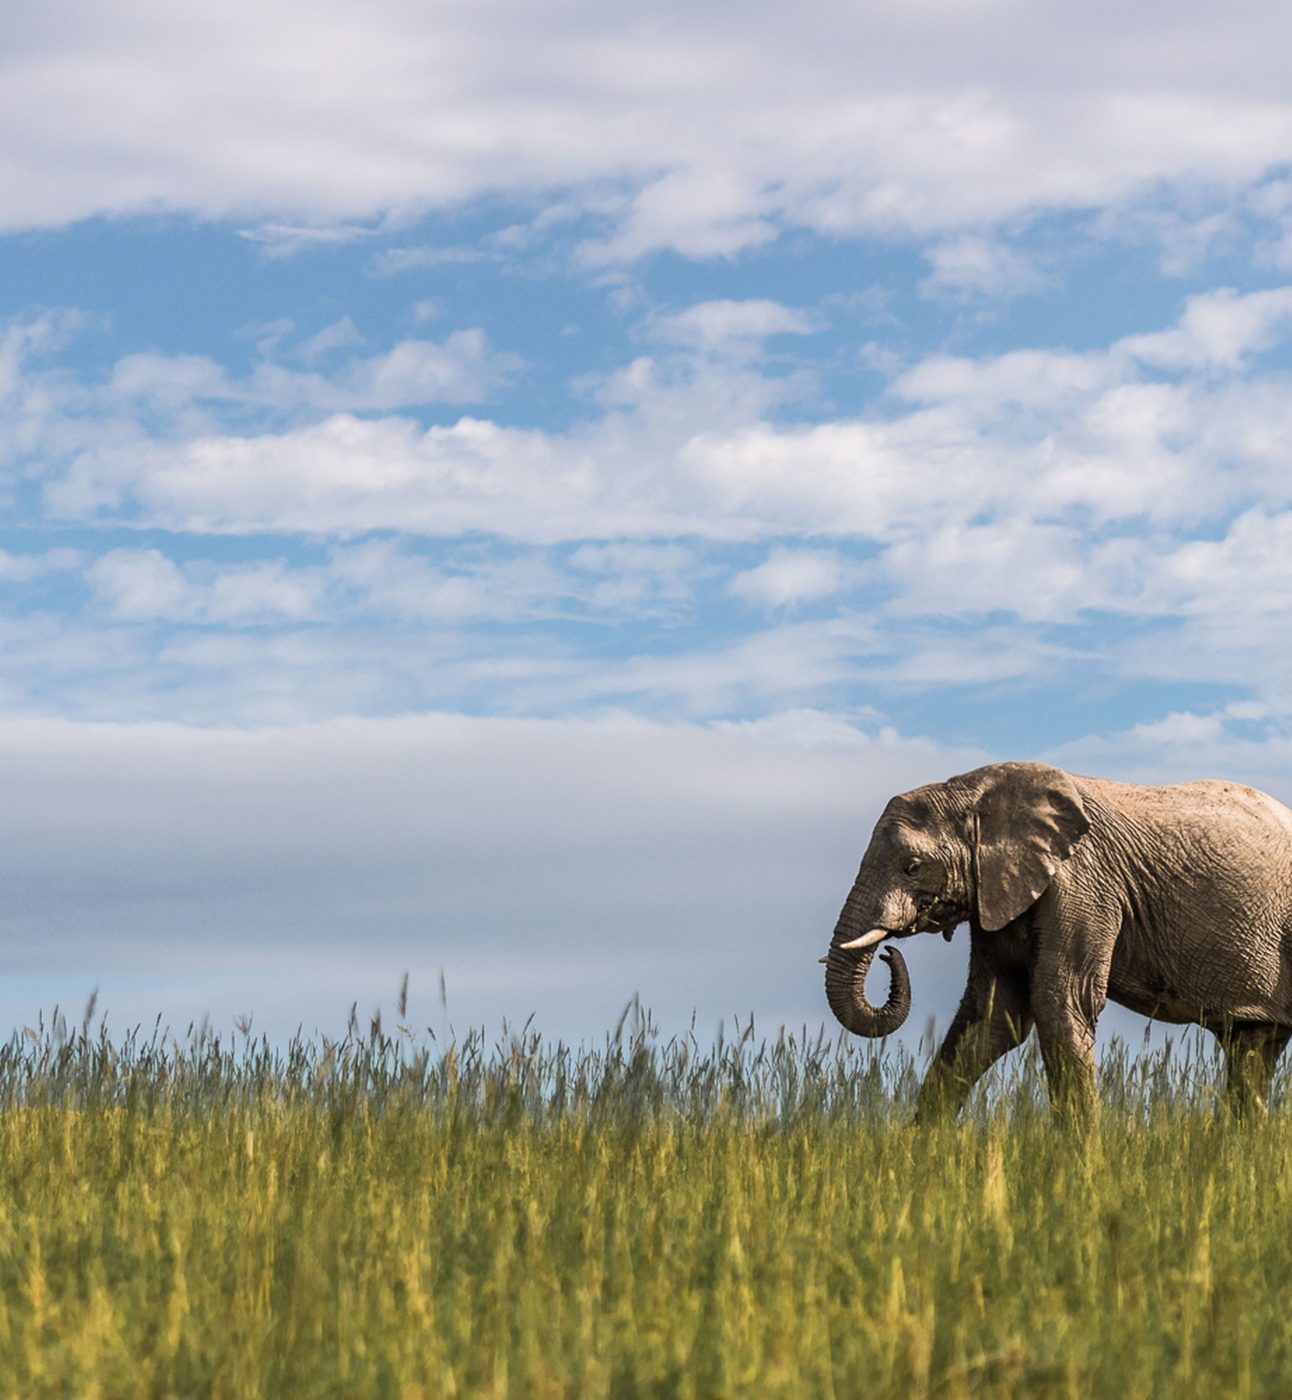 An elephant on the right of the image walks through grass towards the left